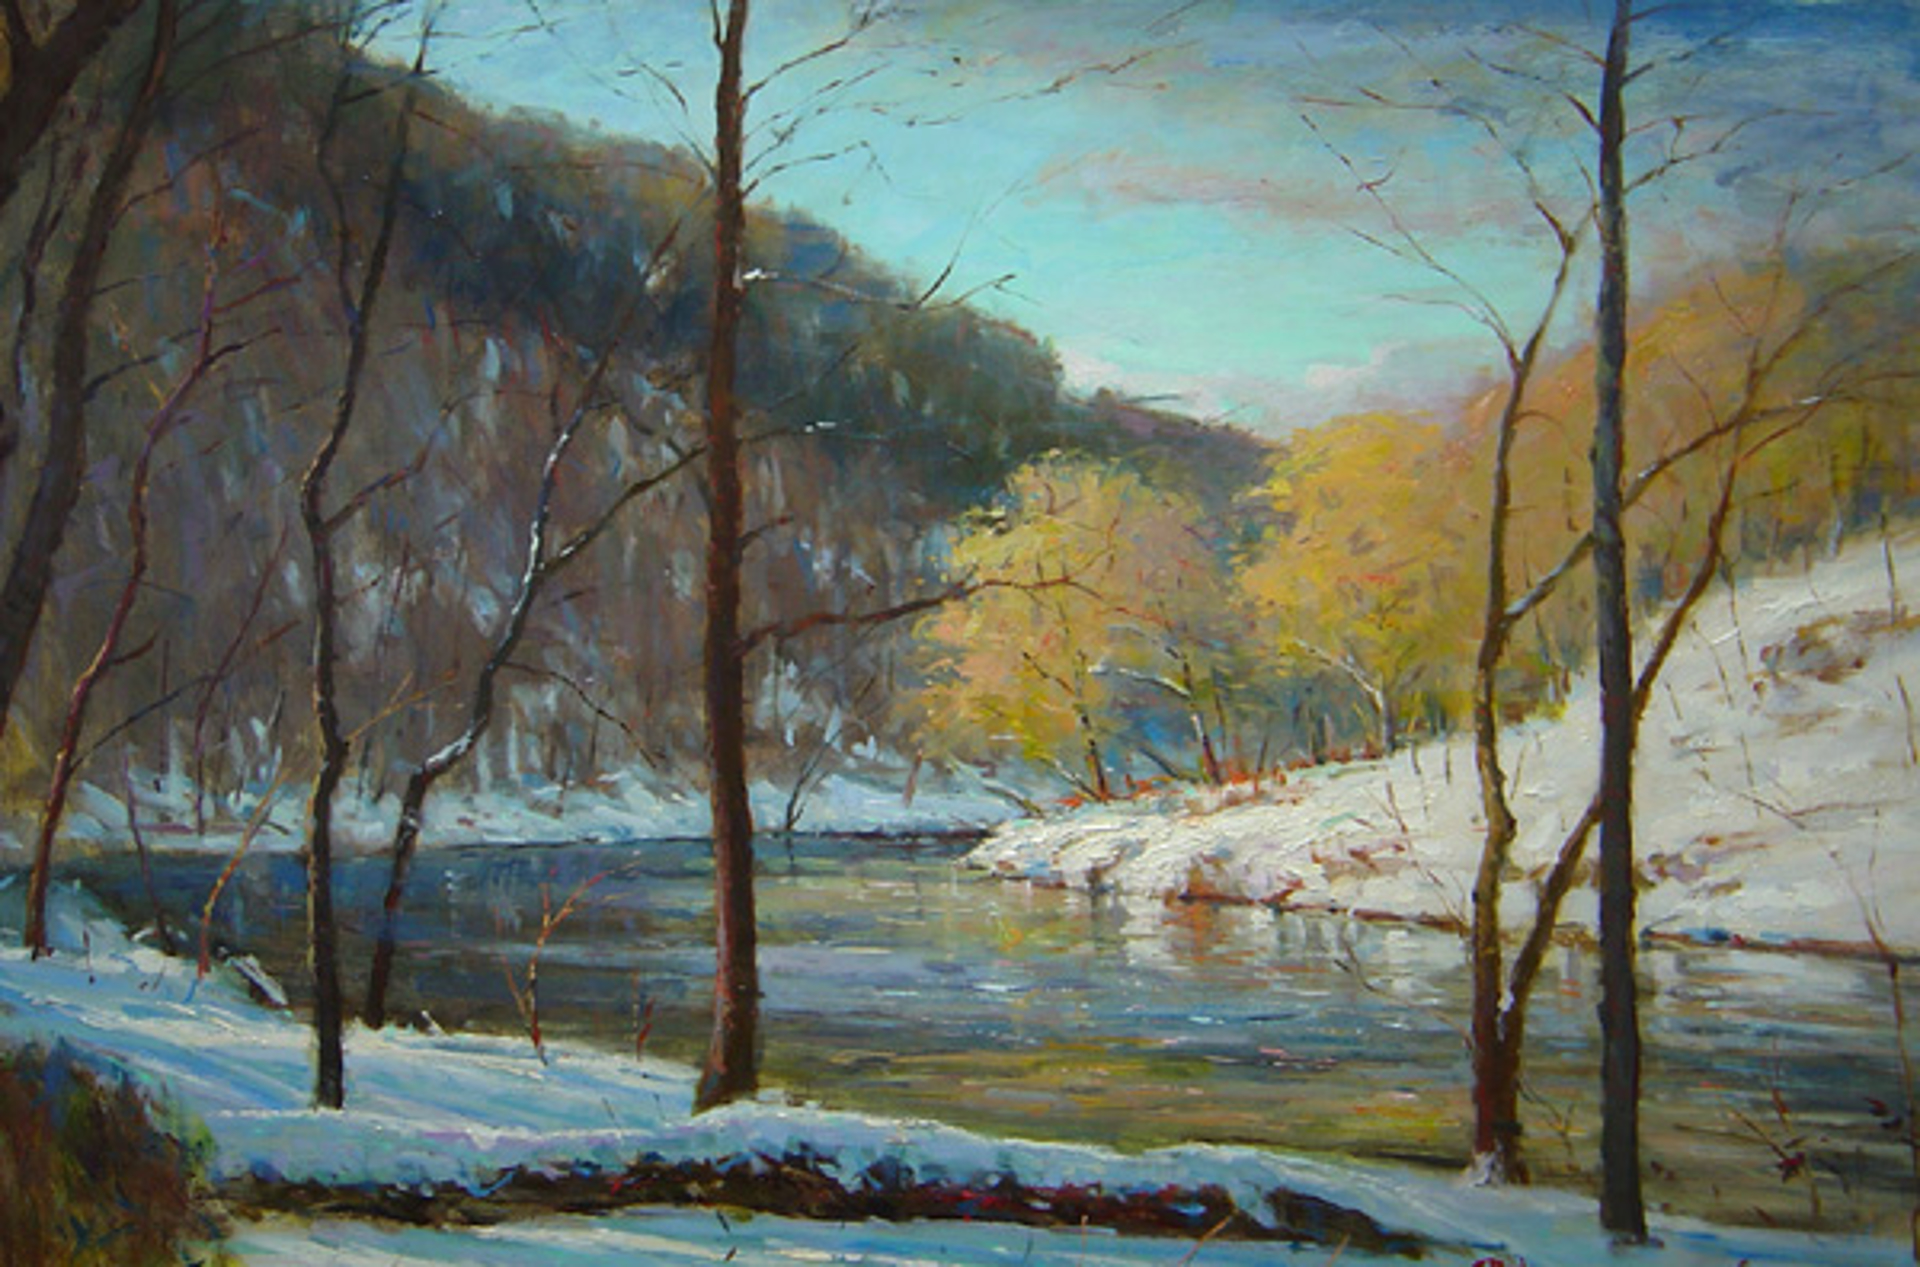 January on the Creek by Jim Rodgers